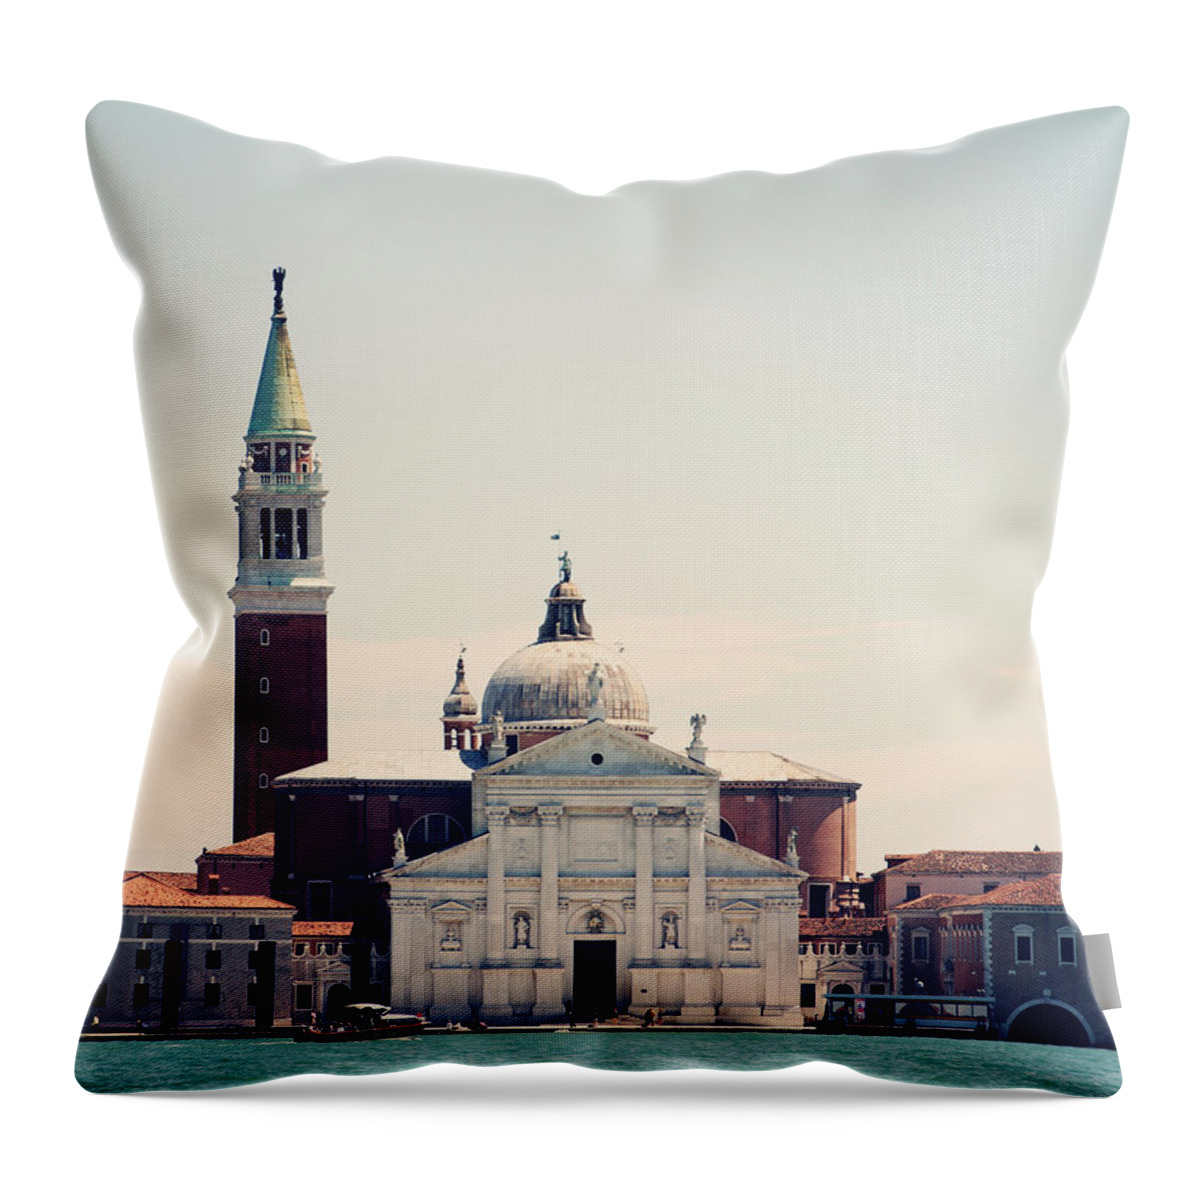  Throw Pillow featuring the photograph Venice 8 #1 by Sylvia Coomes